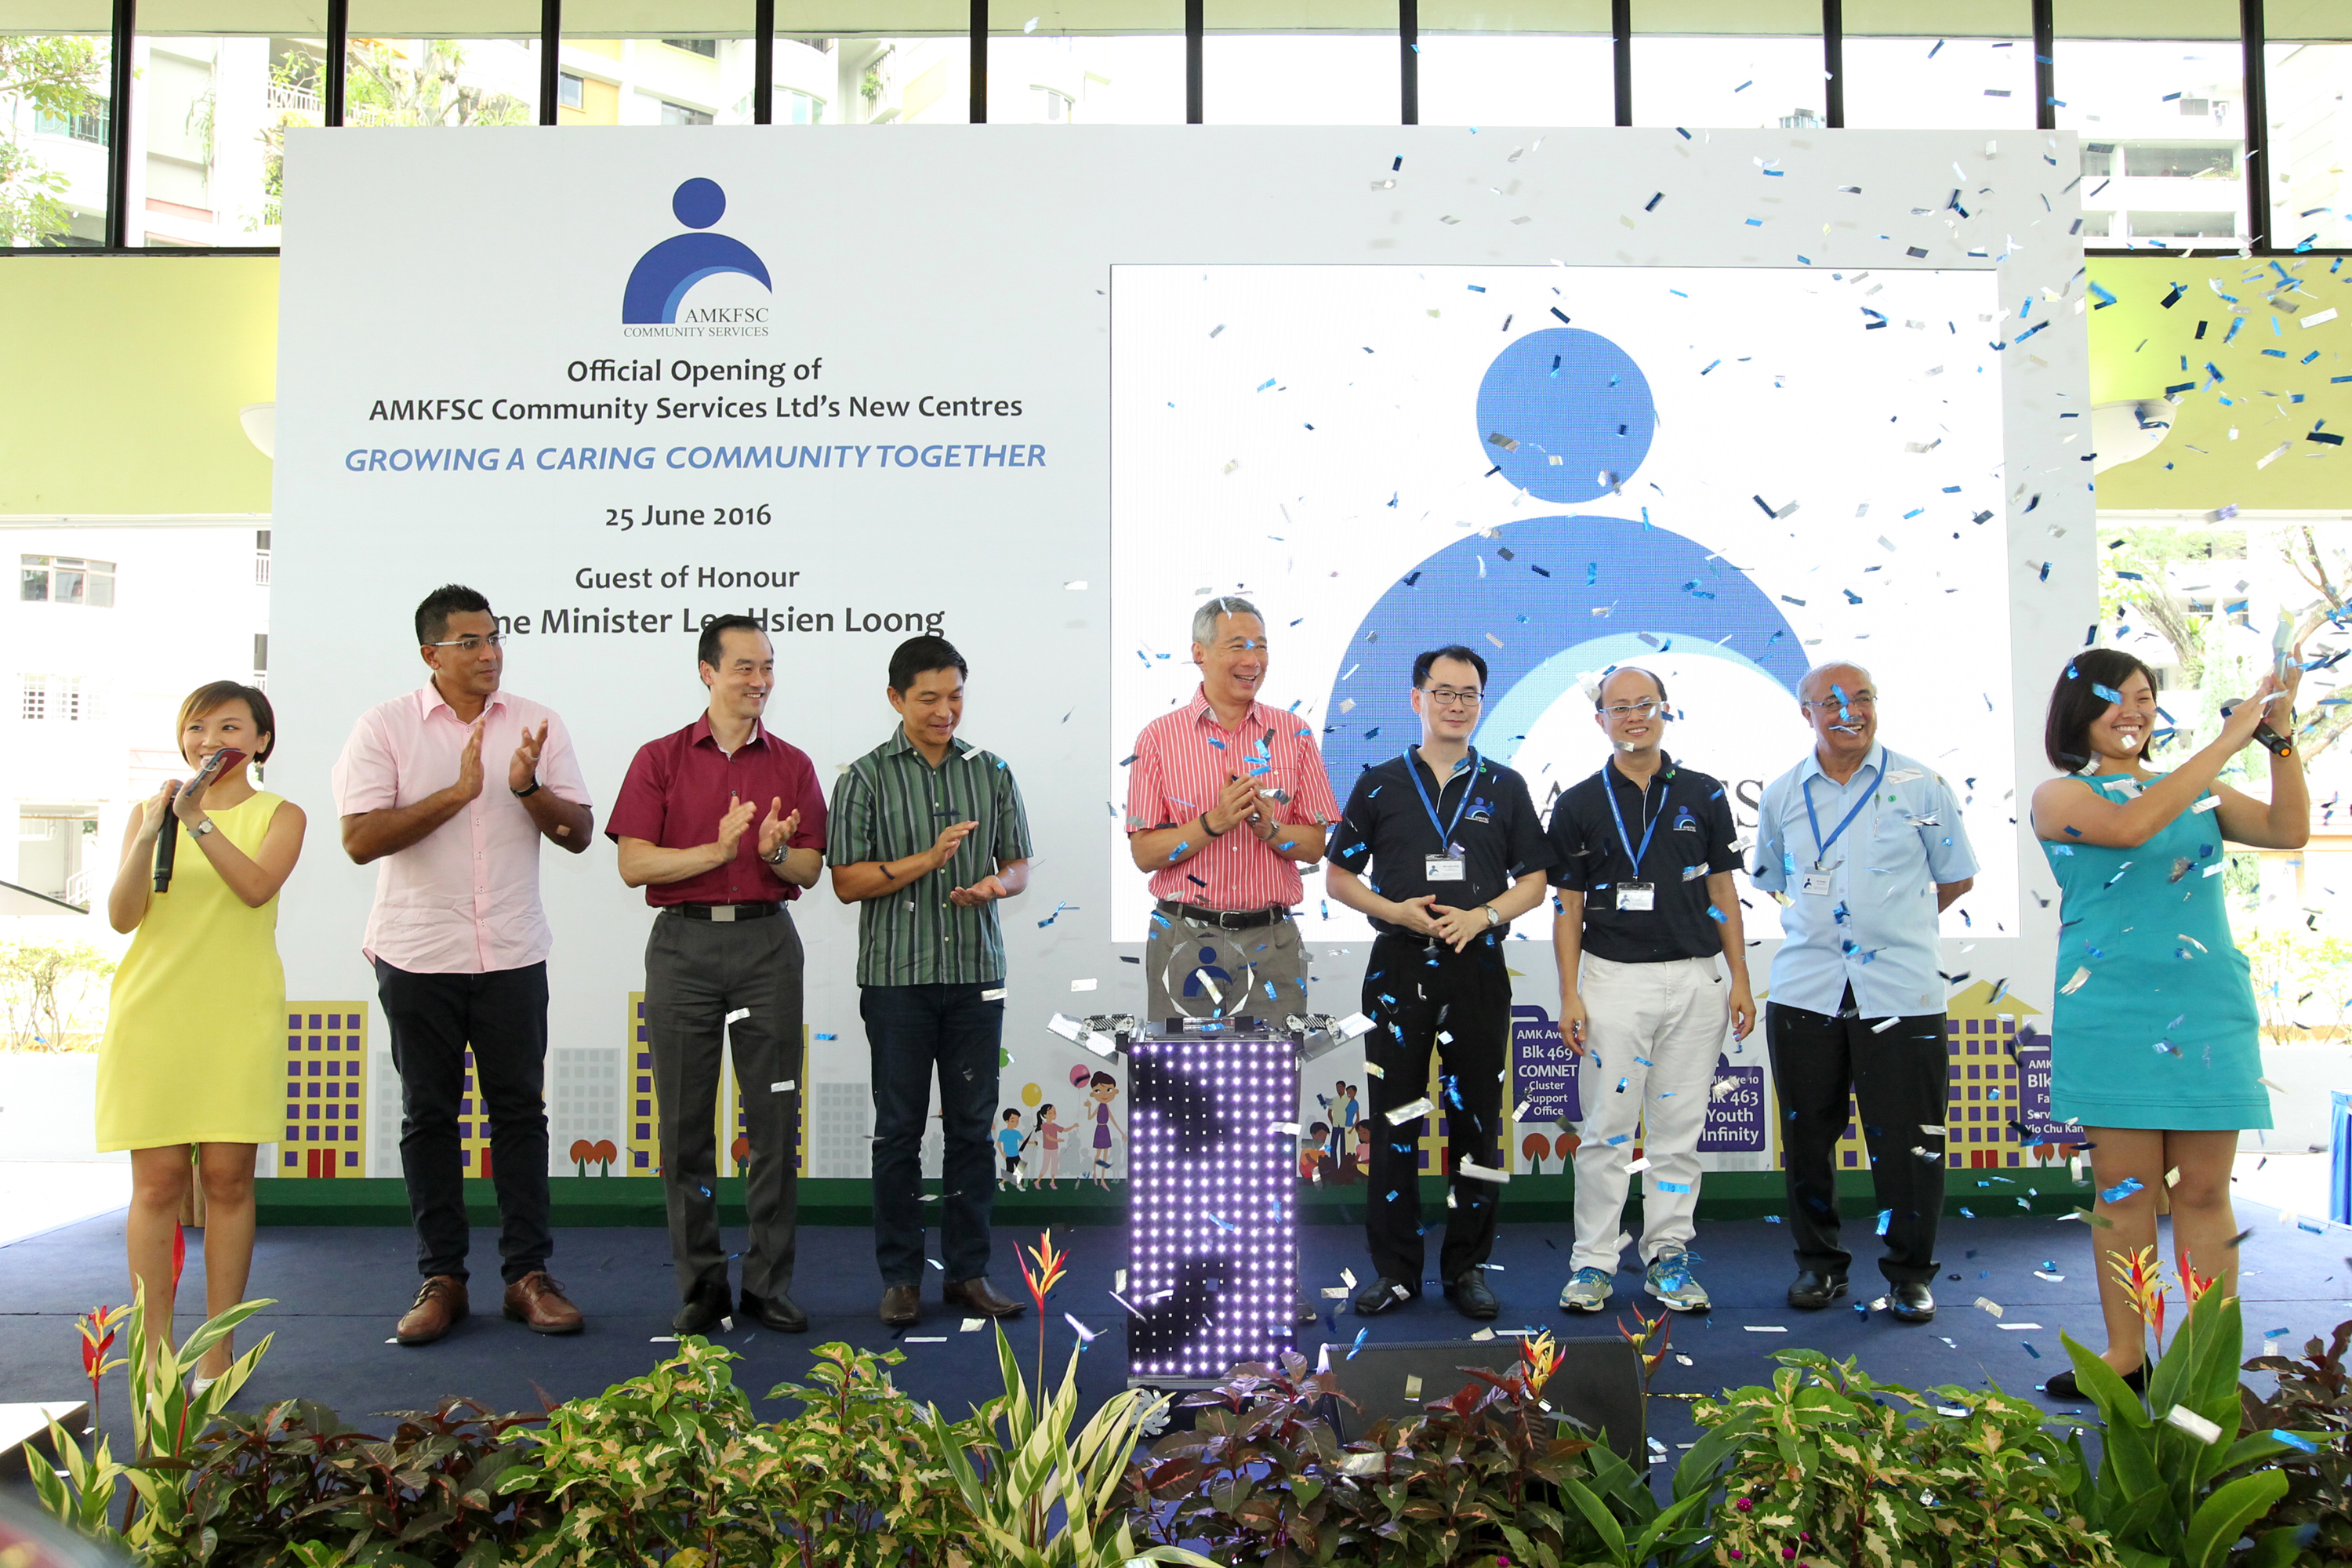 PM Lee Hsien Loong at official opening of 4 new centres of AMKFSC Community Services on 25 Jun 2016 (MCI Photo by Chwee)